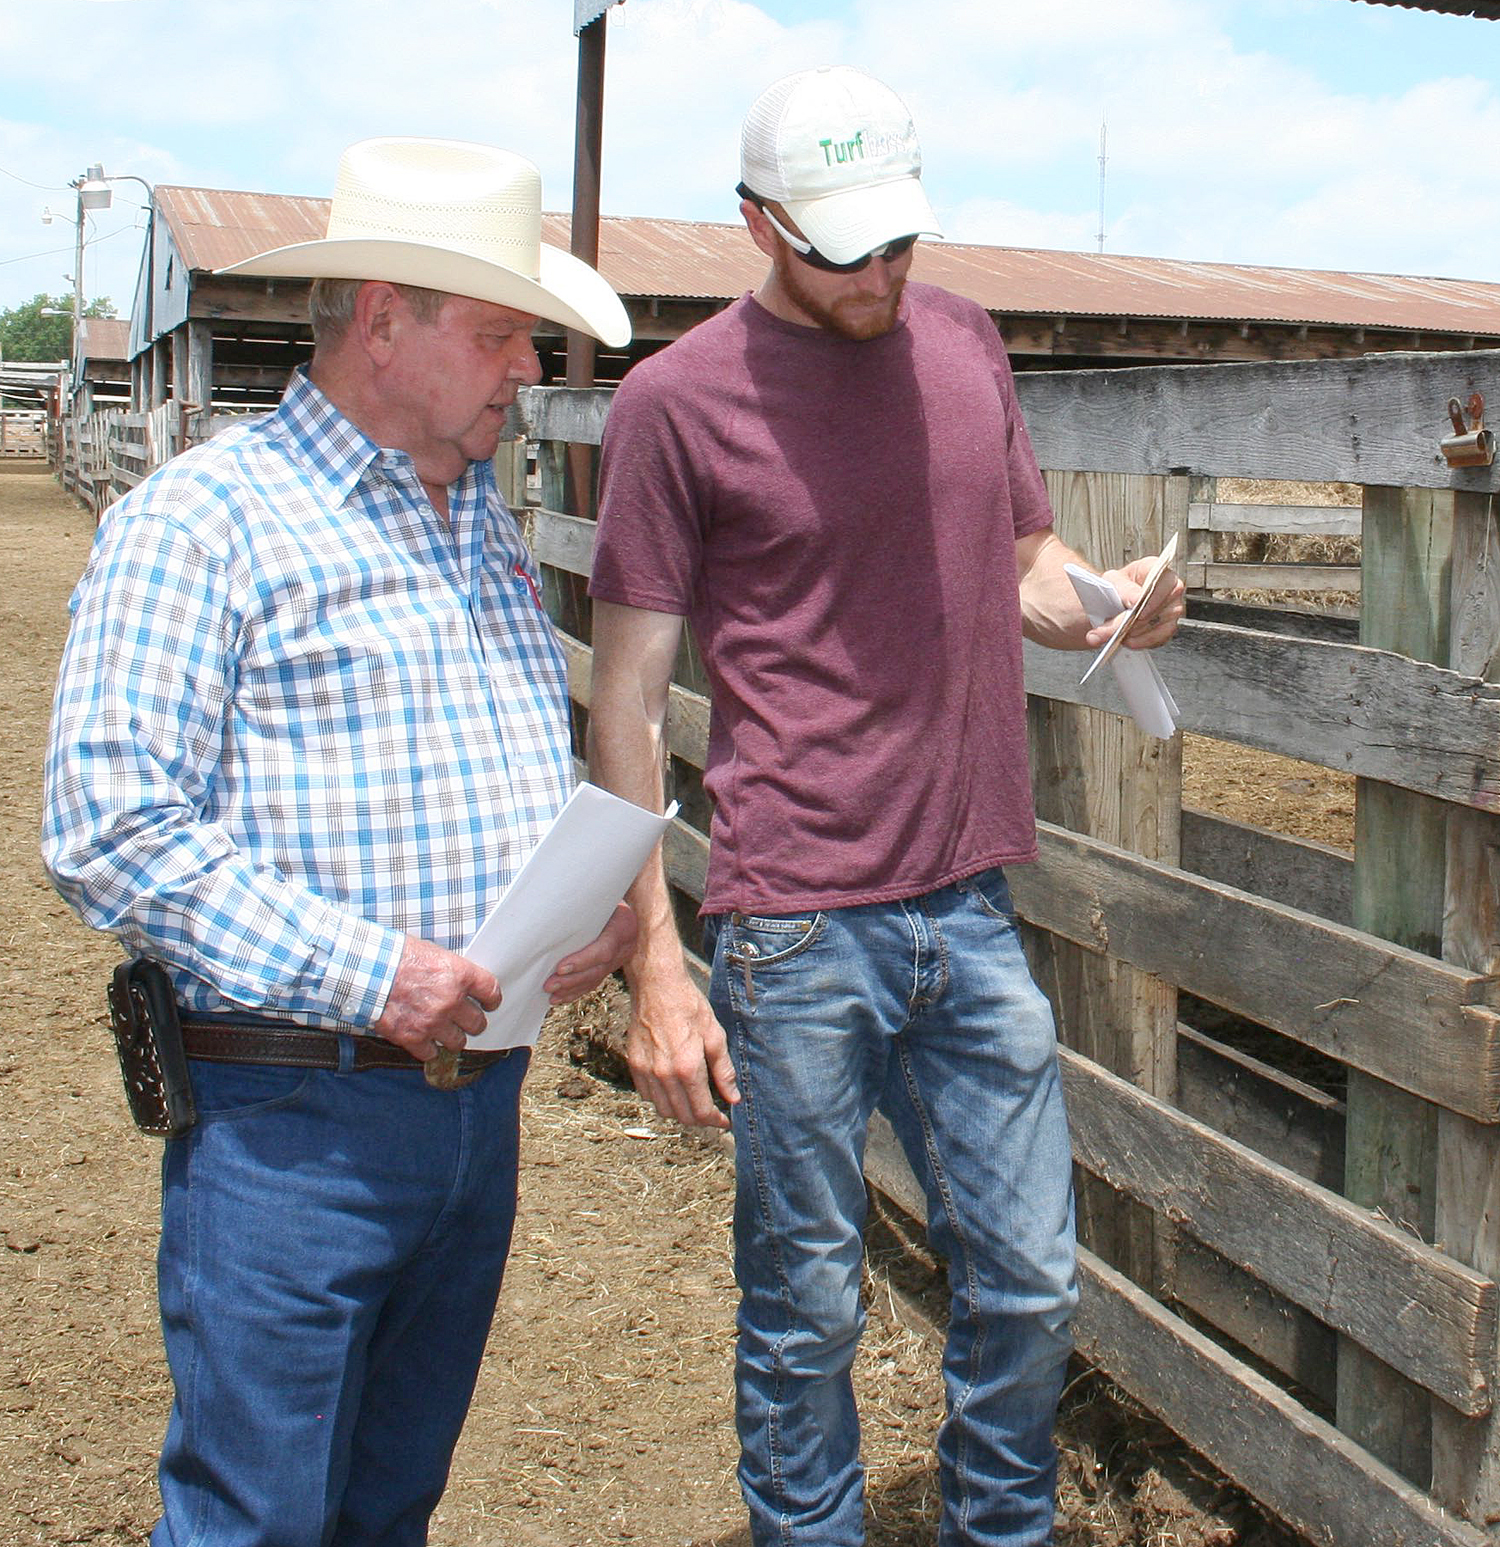 July NETBIO Pre-Conditioned Calf and Yearling Sale Features Sale of 5,520 Head of Cattle